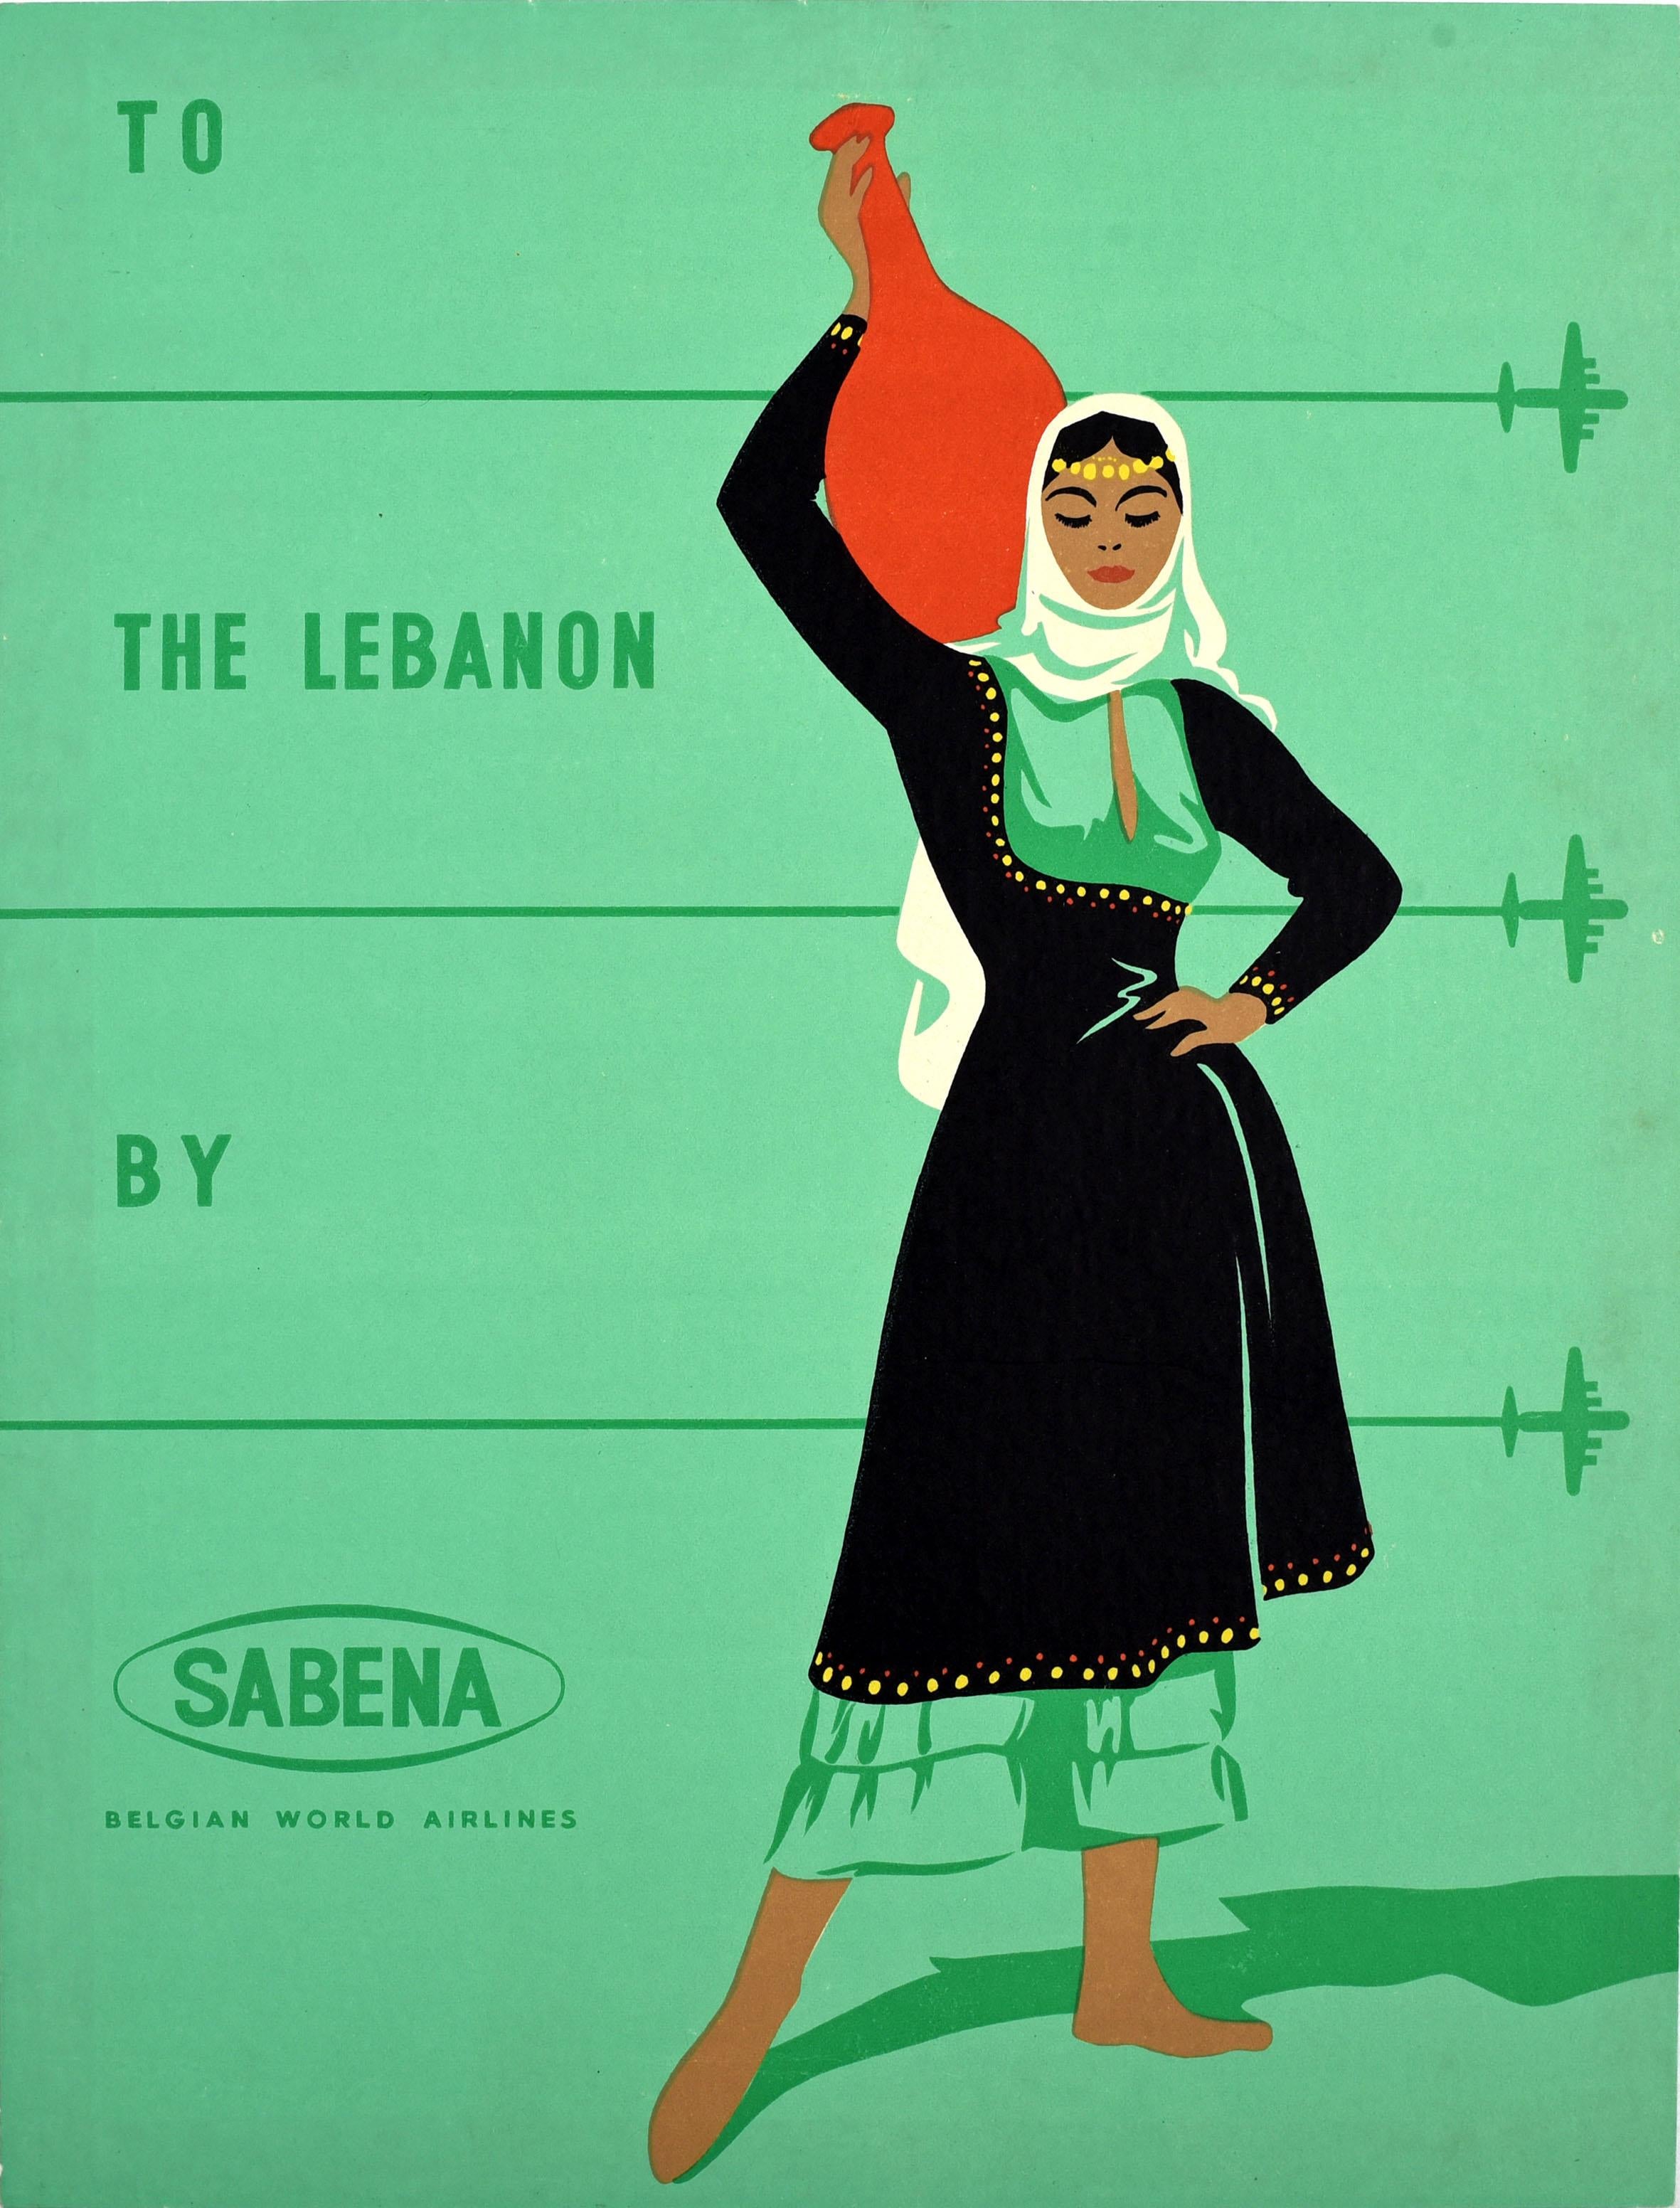 Unknown Print - Original Vintage Travel Poster To The Lebanon By Sabena Belgian World Airlines